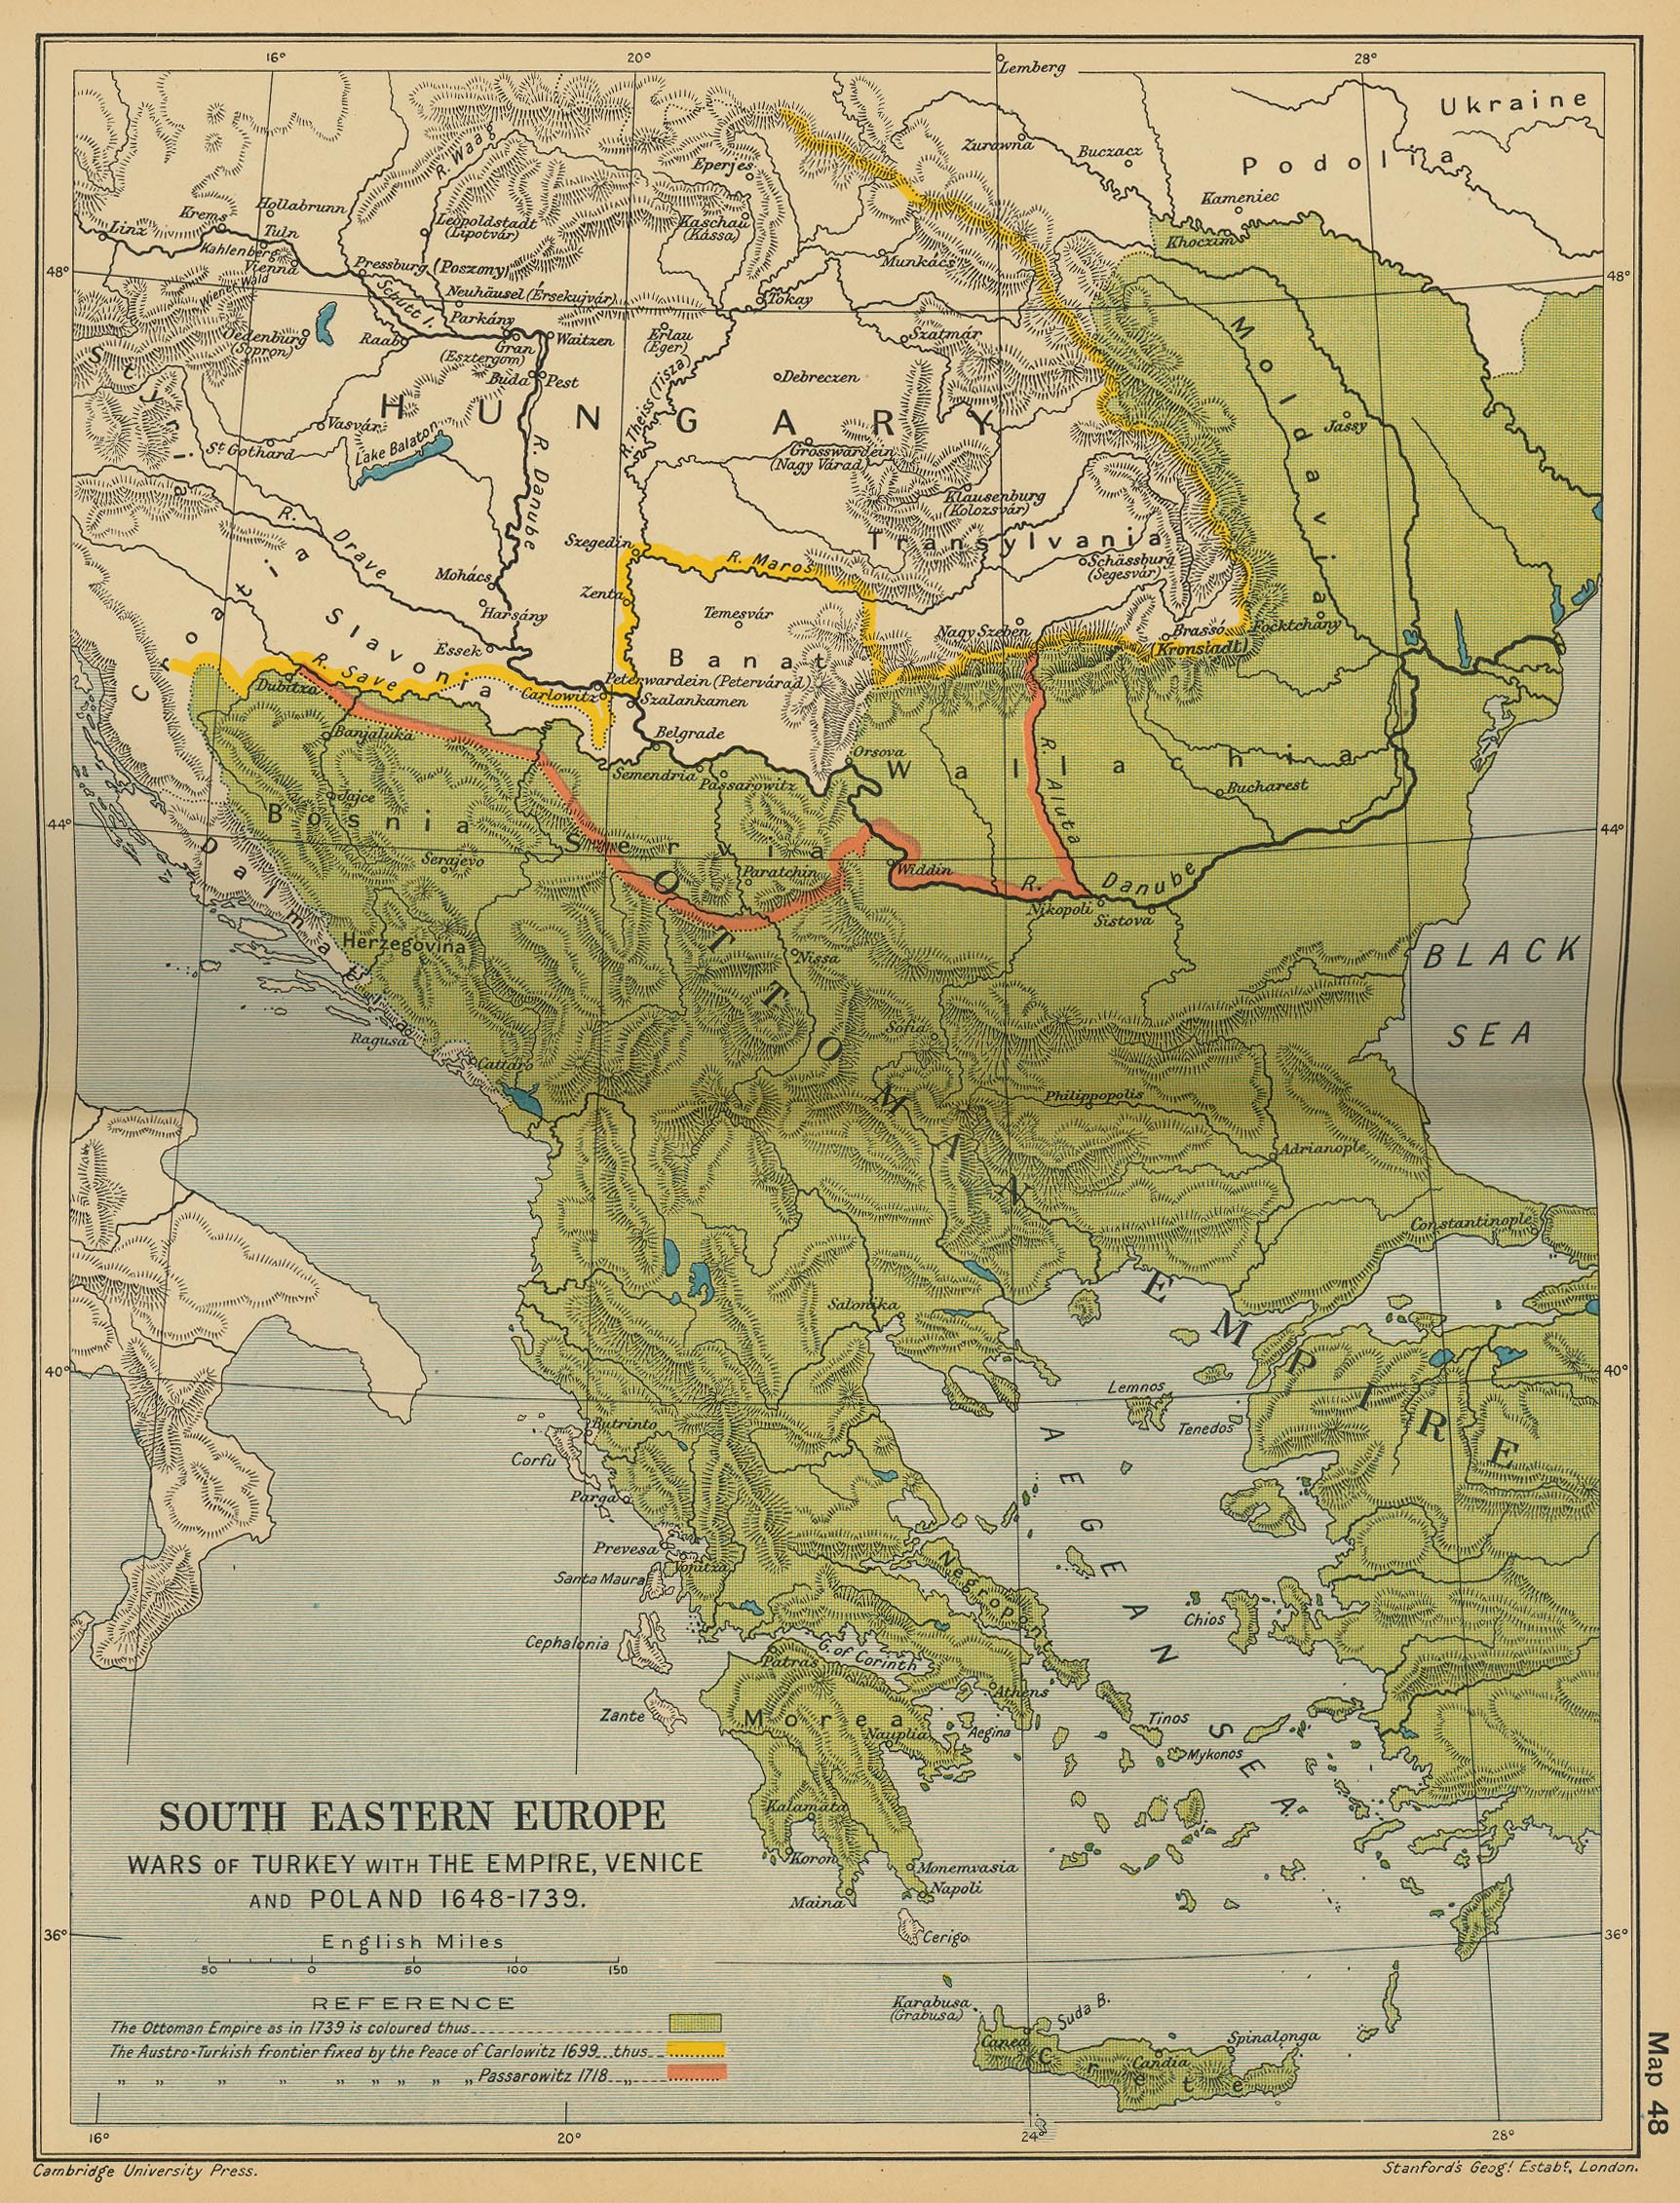 Map of South Eastern Europe 1648-1739